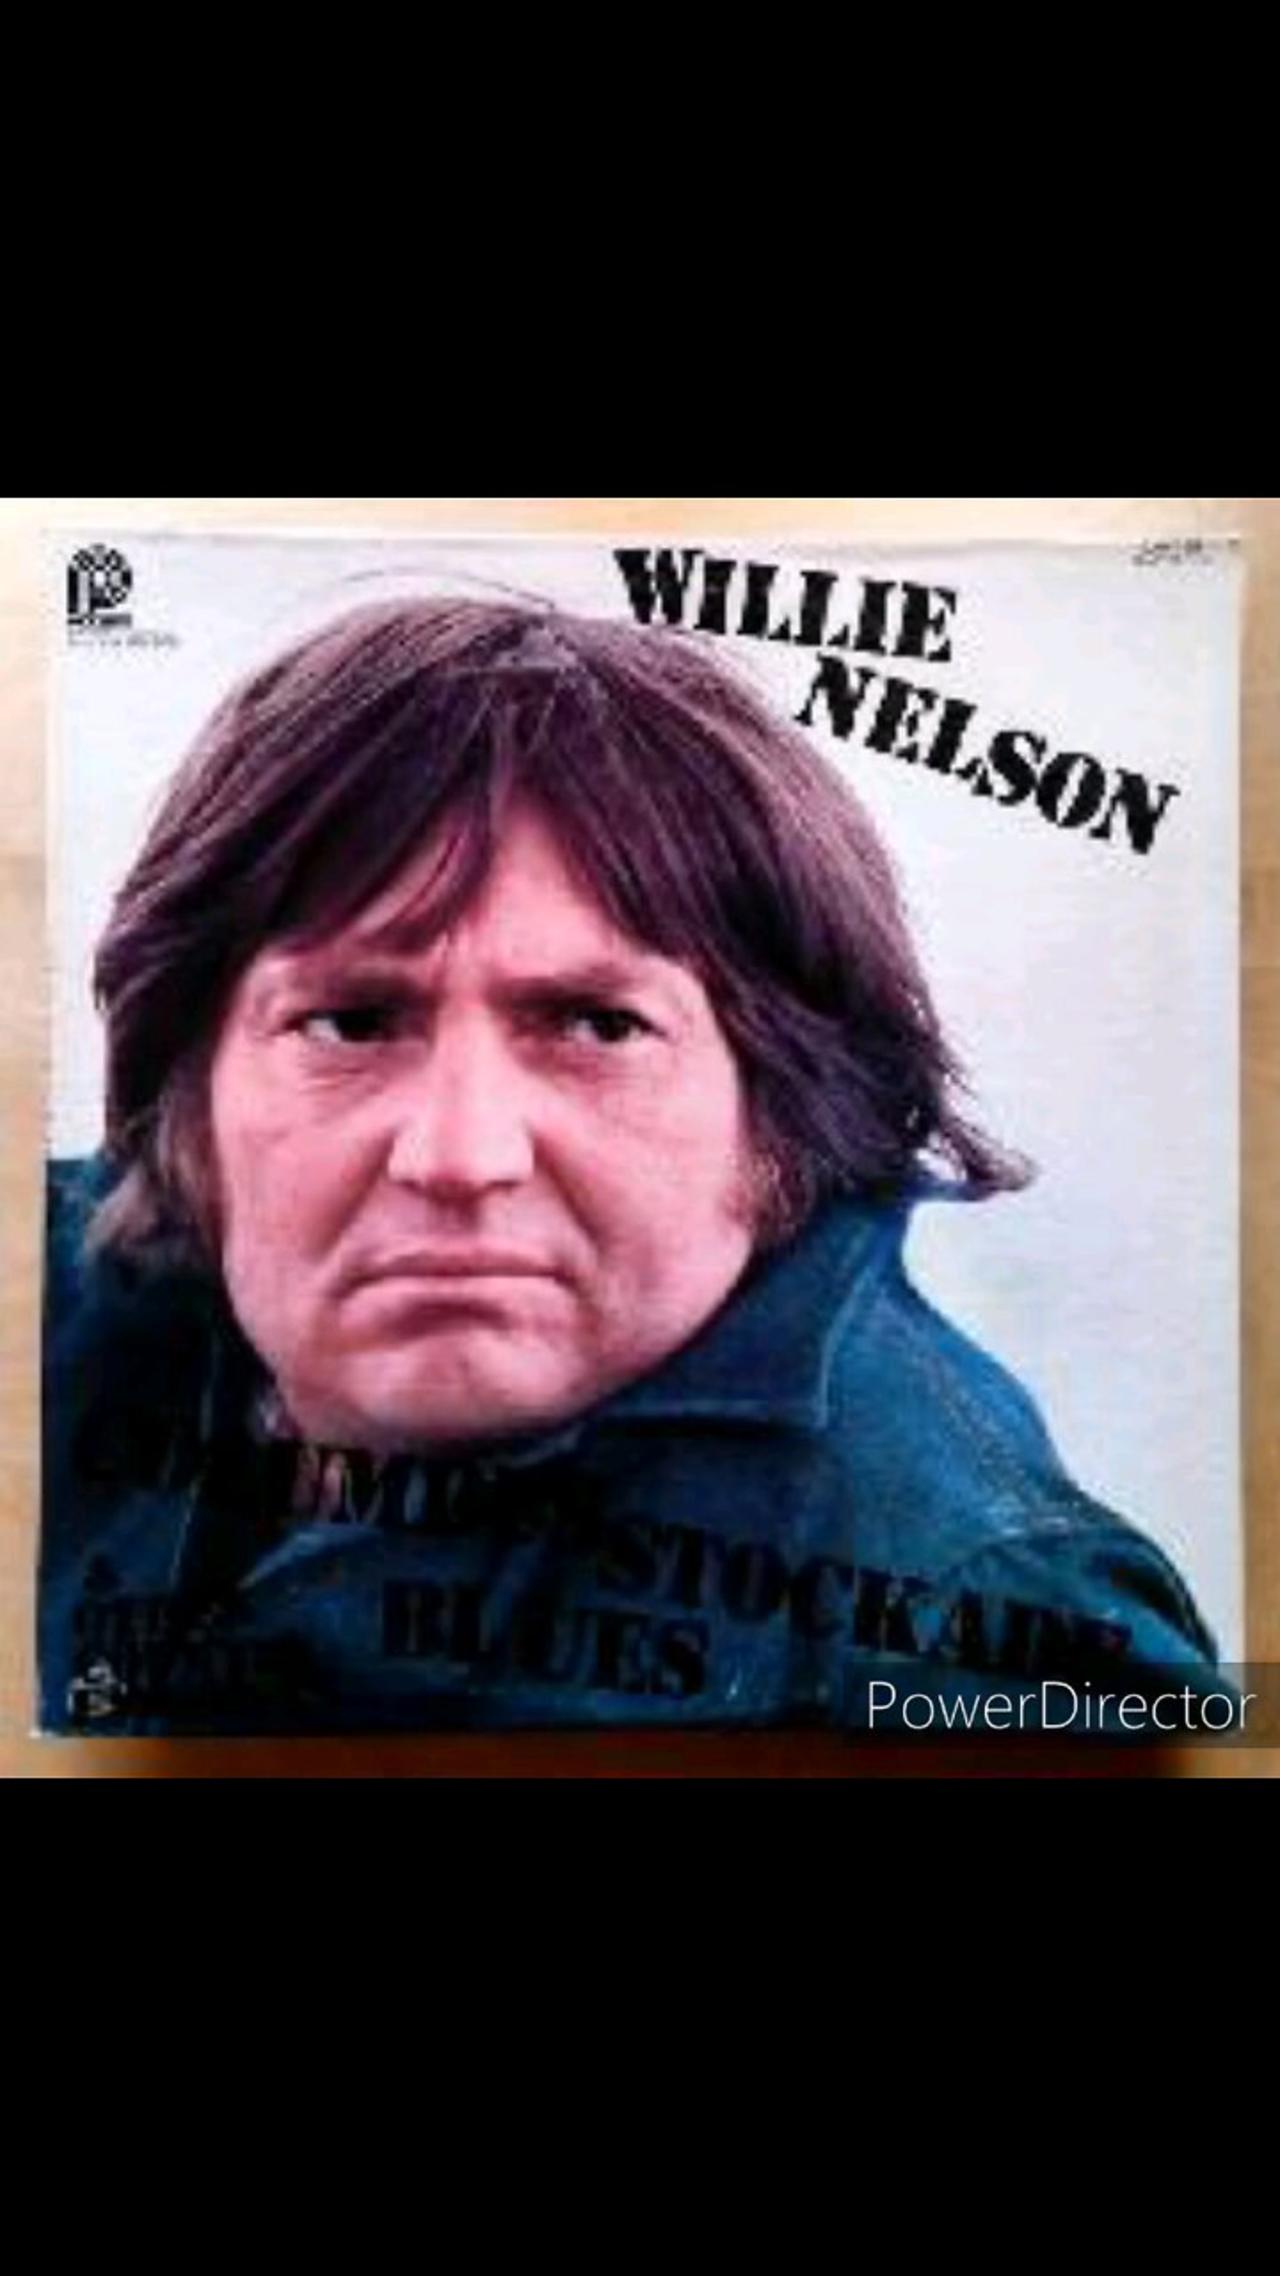 Willie Nelson - Are You Sure